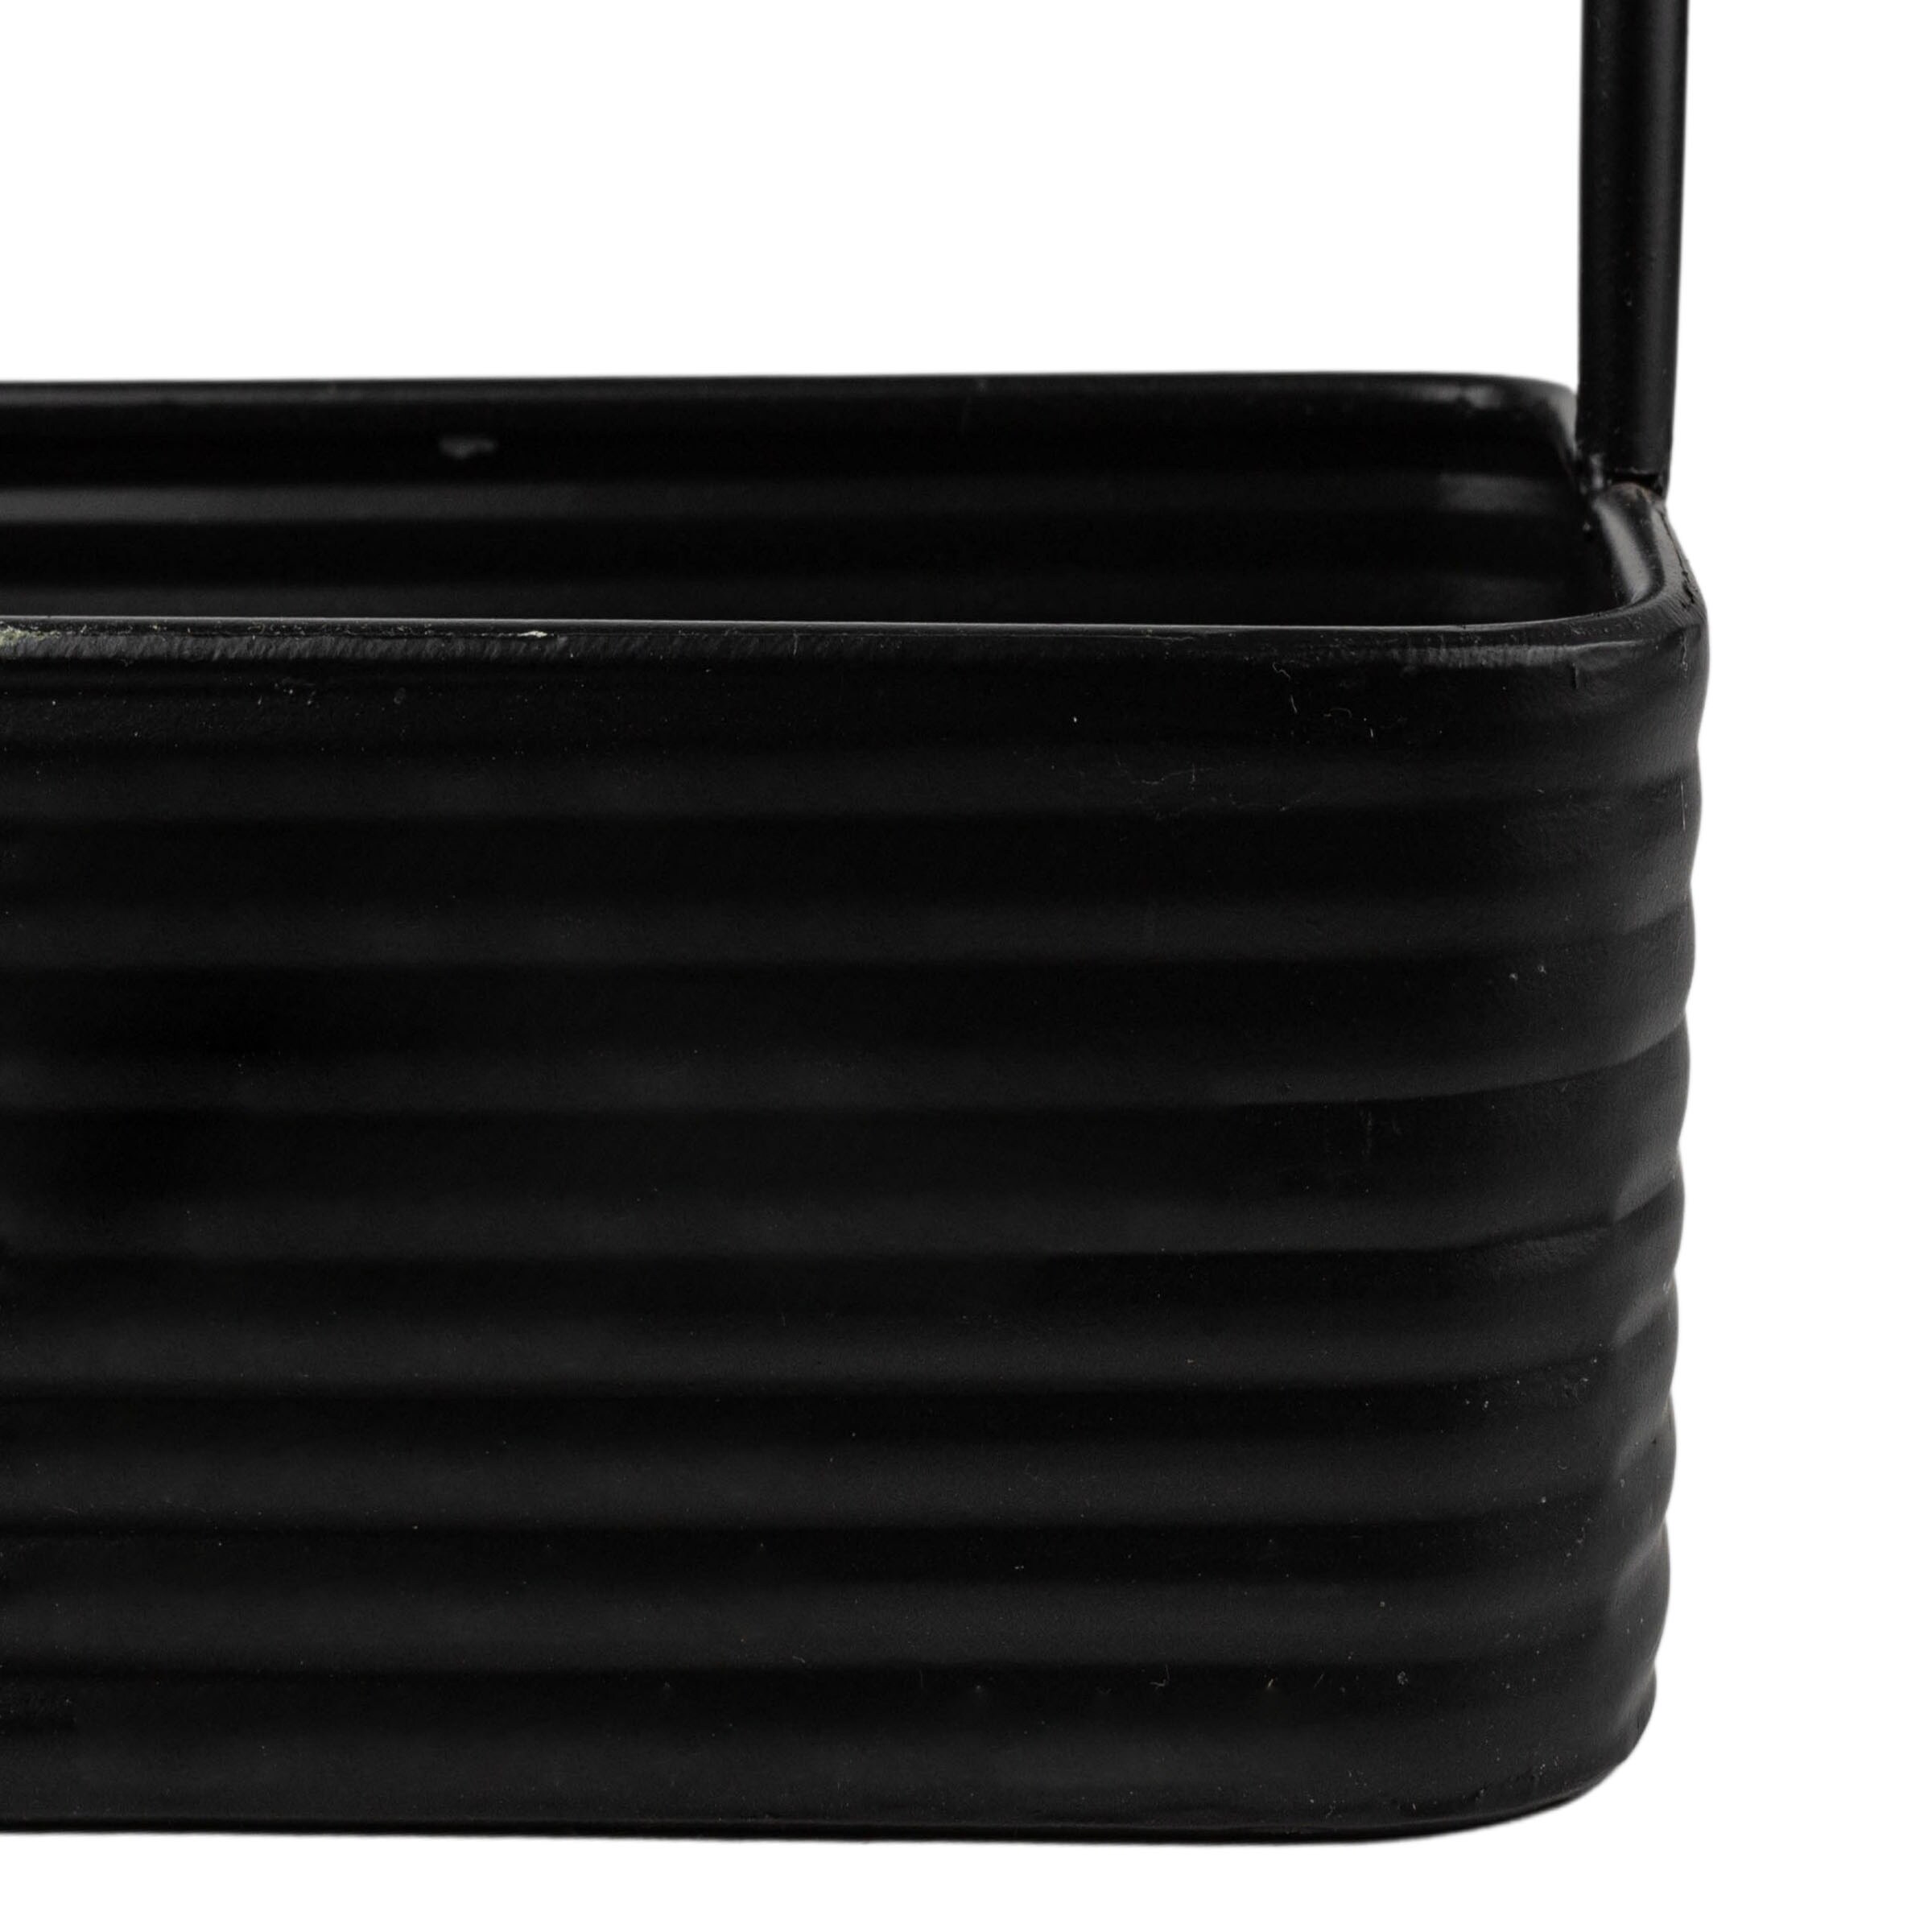 Foreside Home & Garden Footed Caddy Black Metal